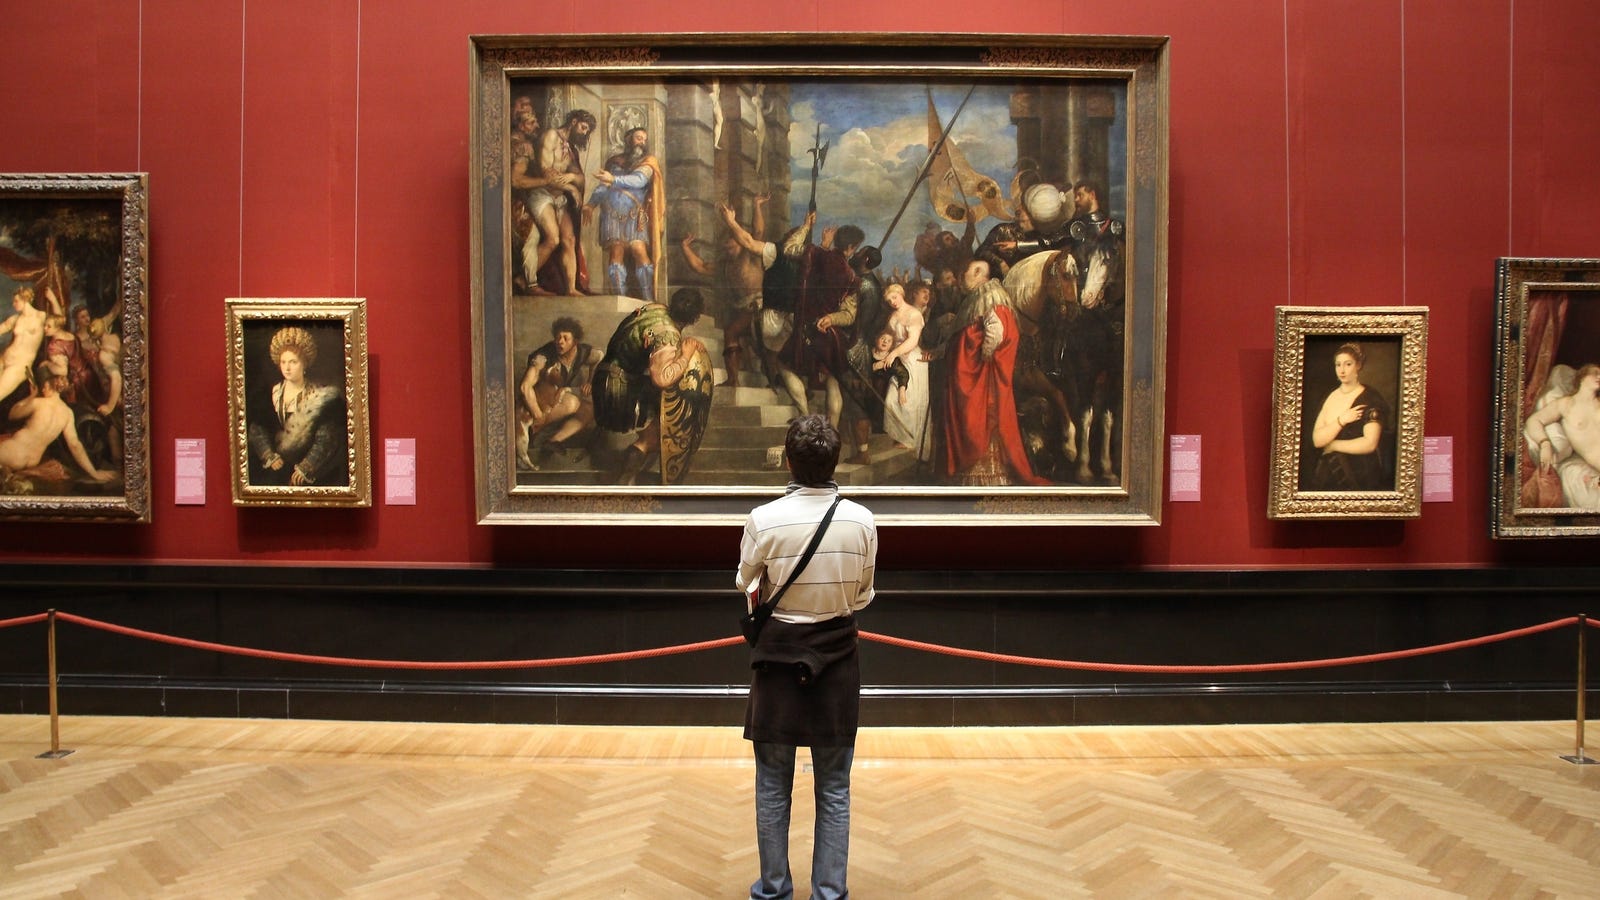 View all the collections of the museums around the world